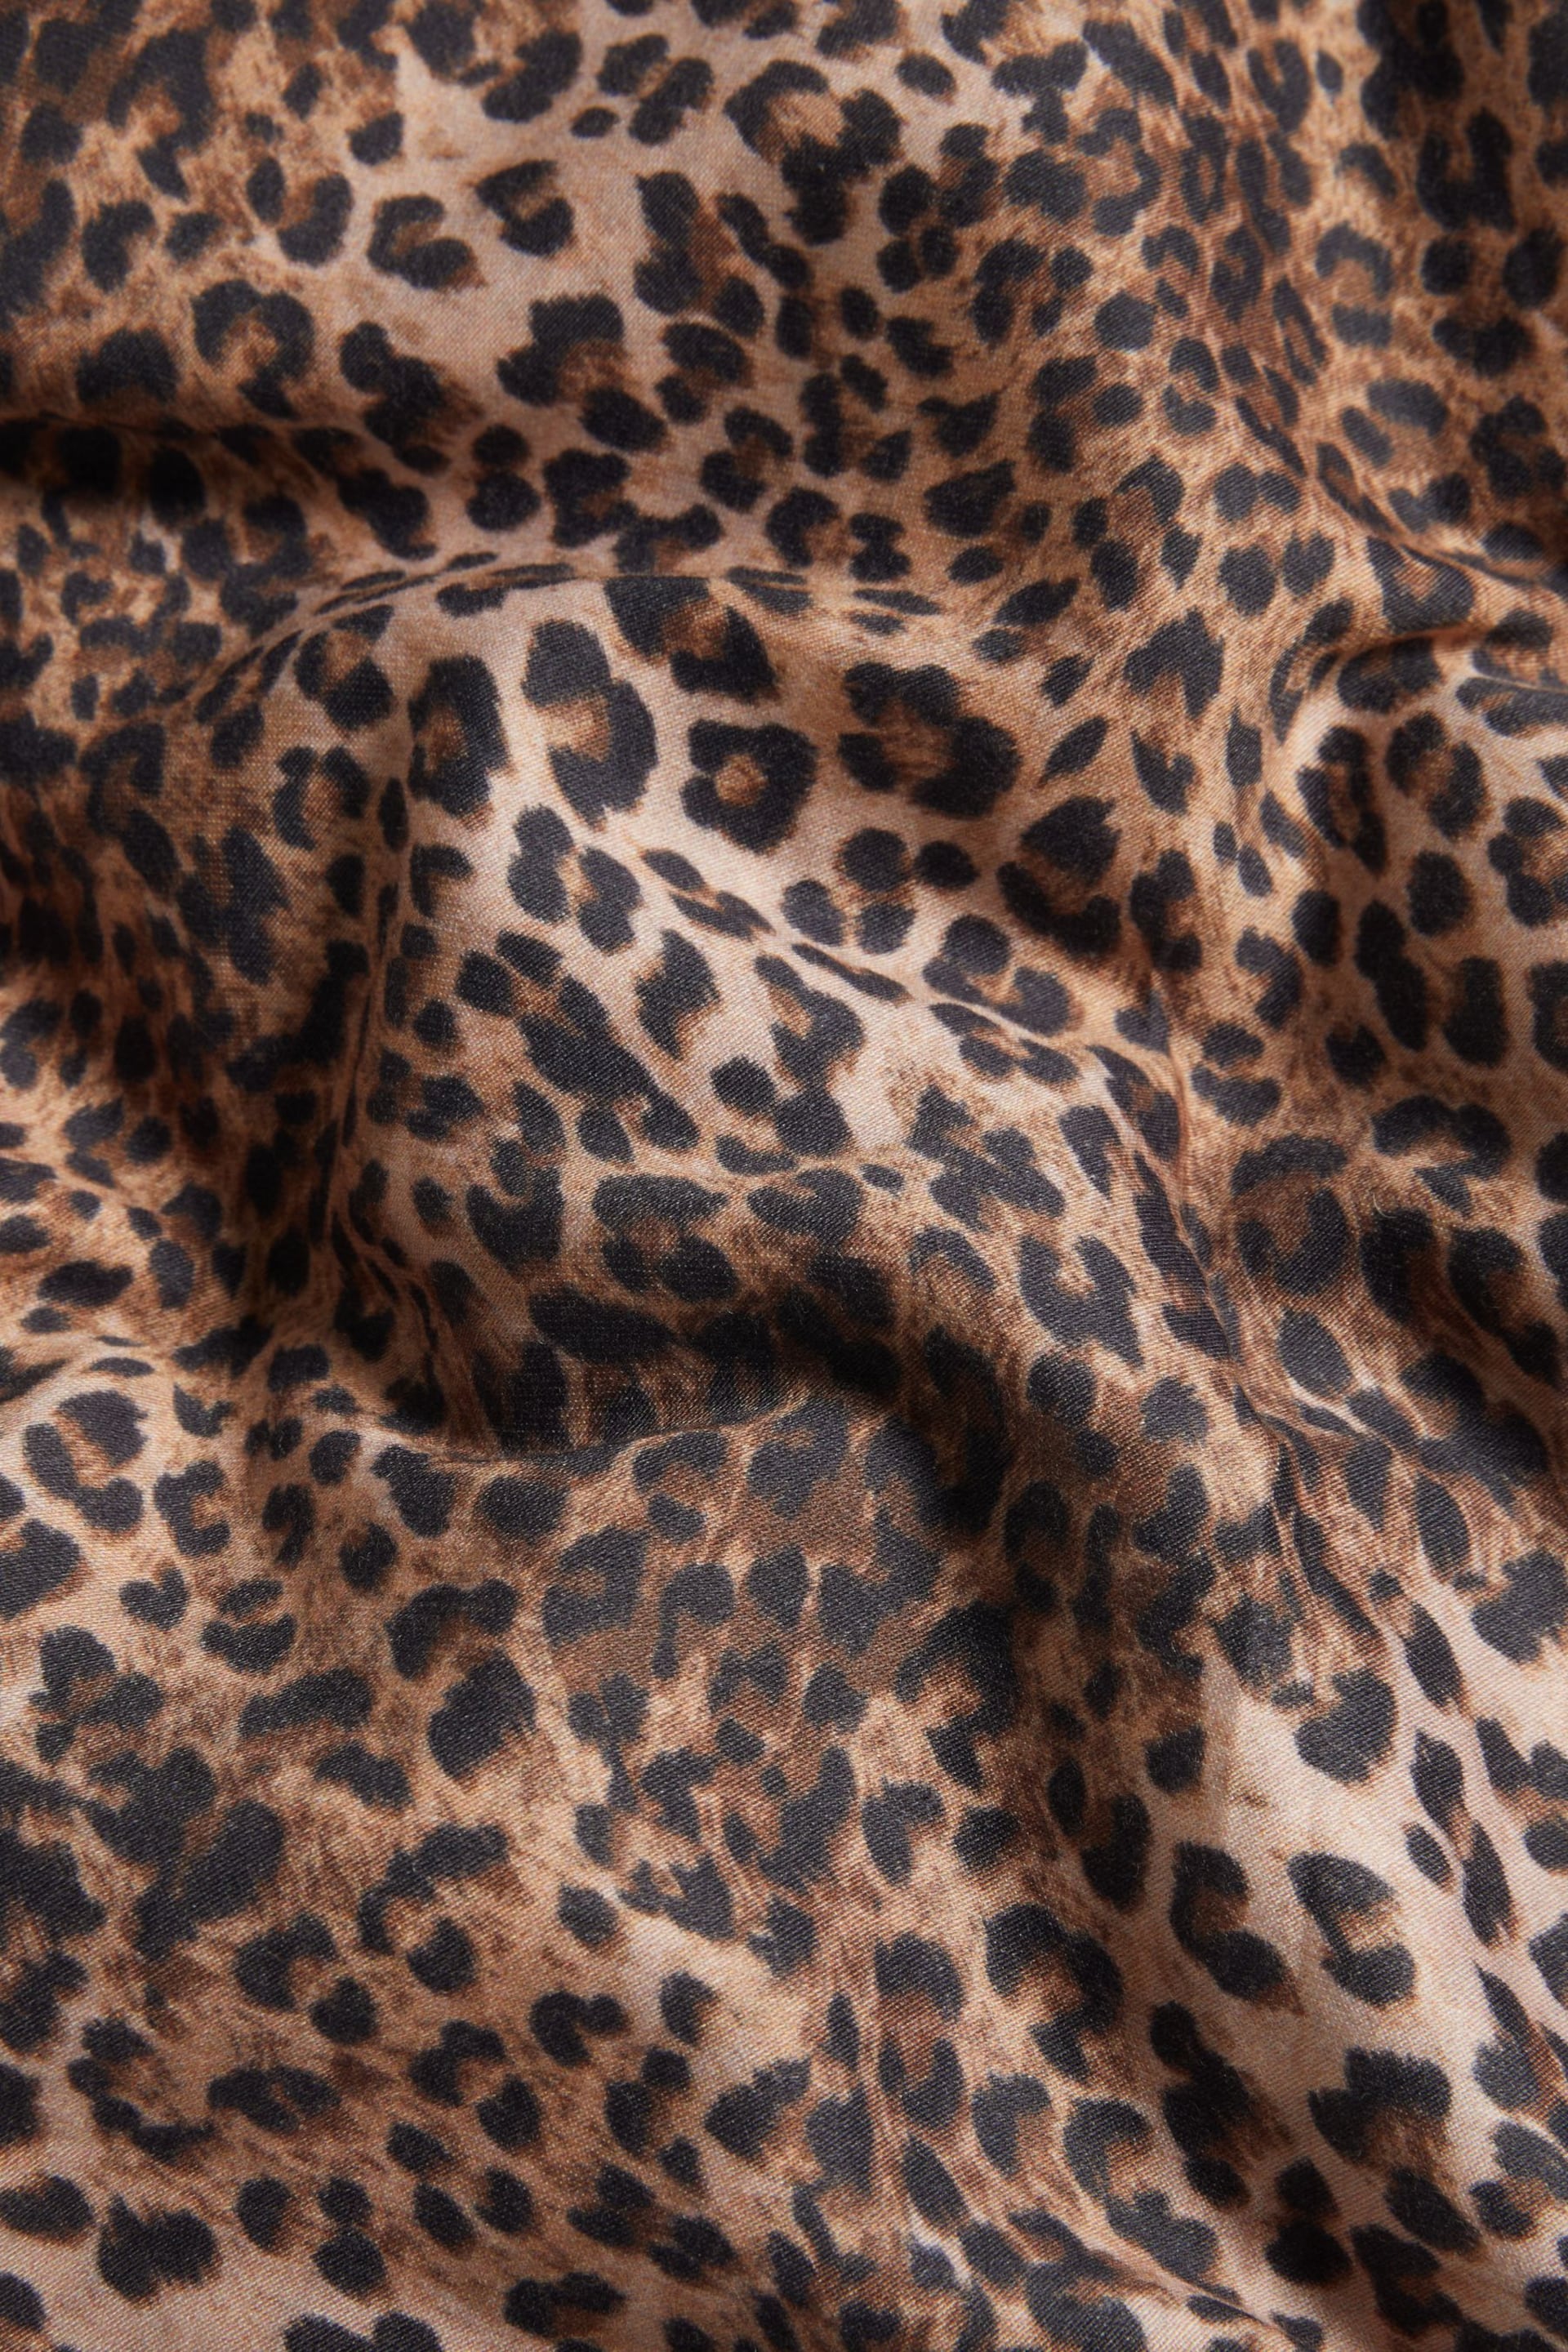 Rockett St George Leopard Love Duvet Cover and Pillowcase Set - Image 5 of 5